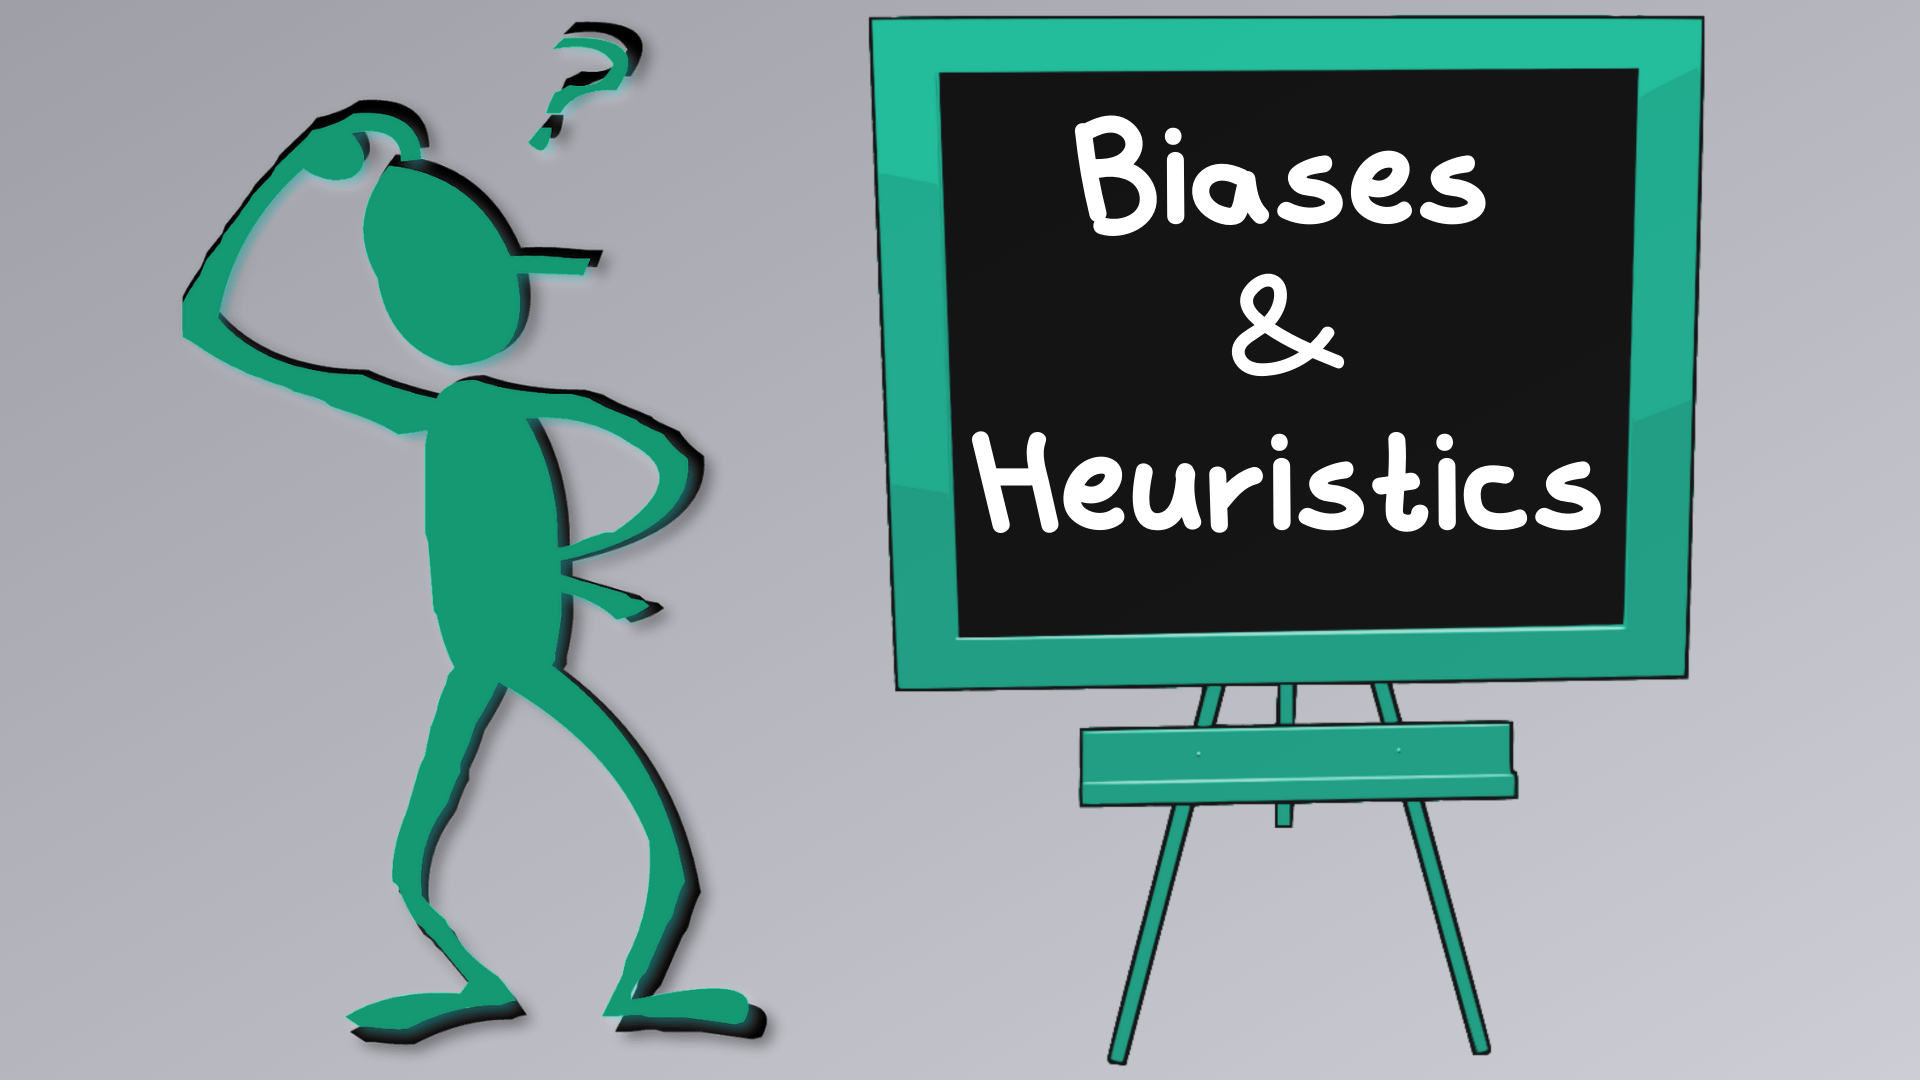 Guide to the Most Common Cognitive Biases and Heuristics